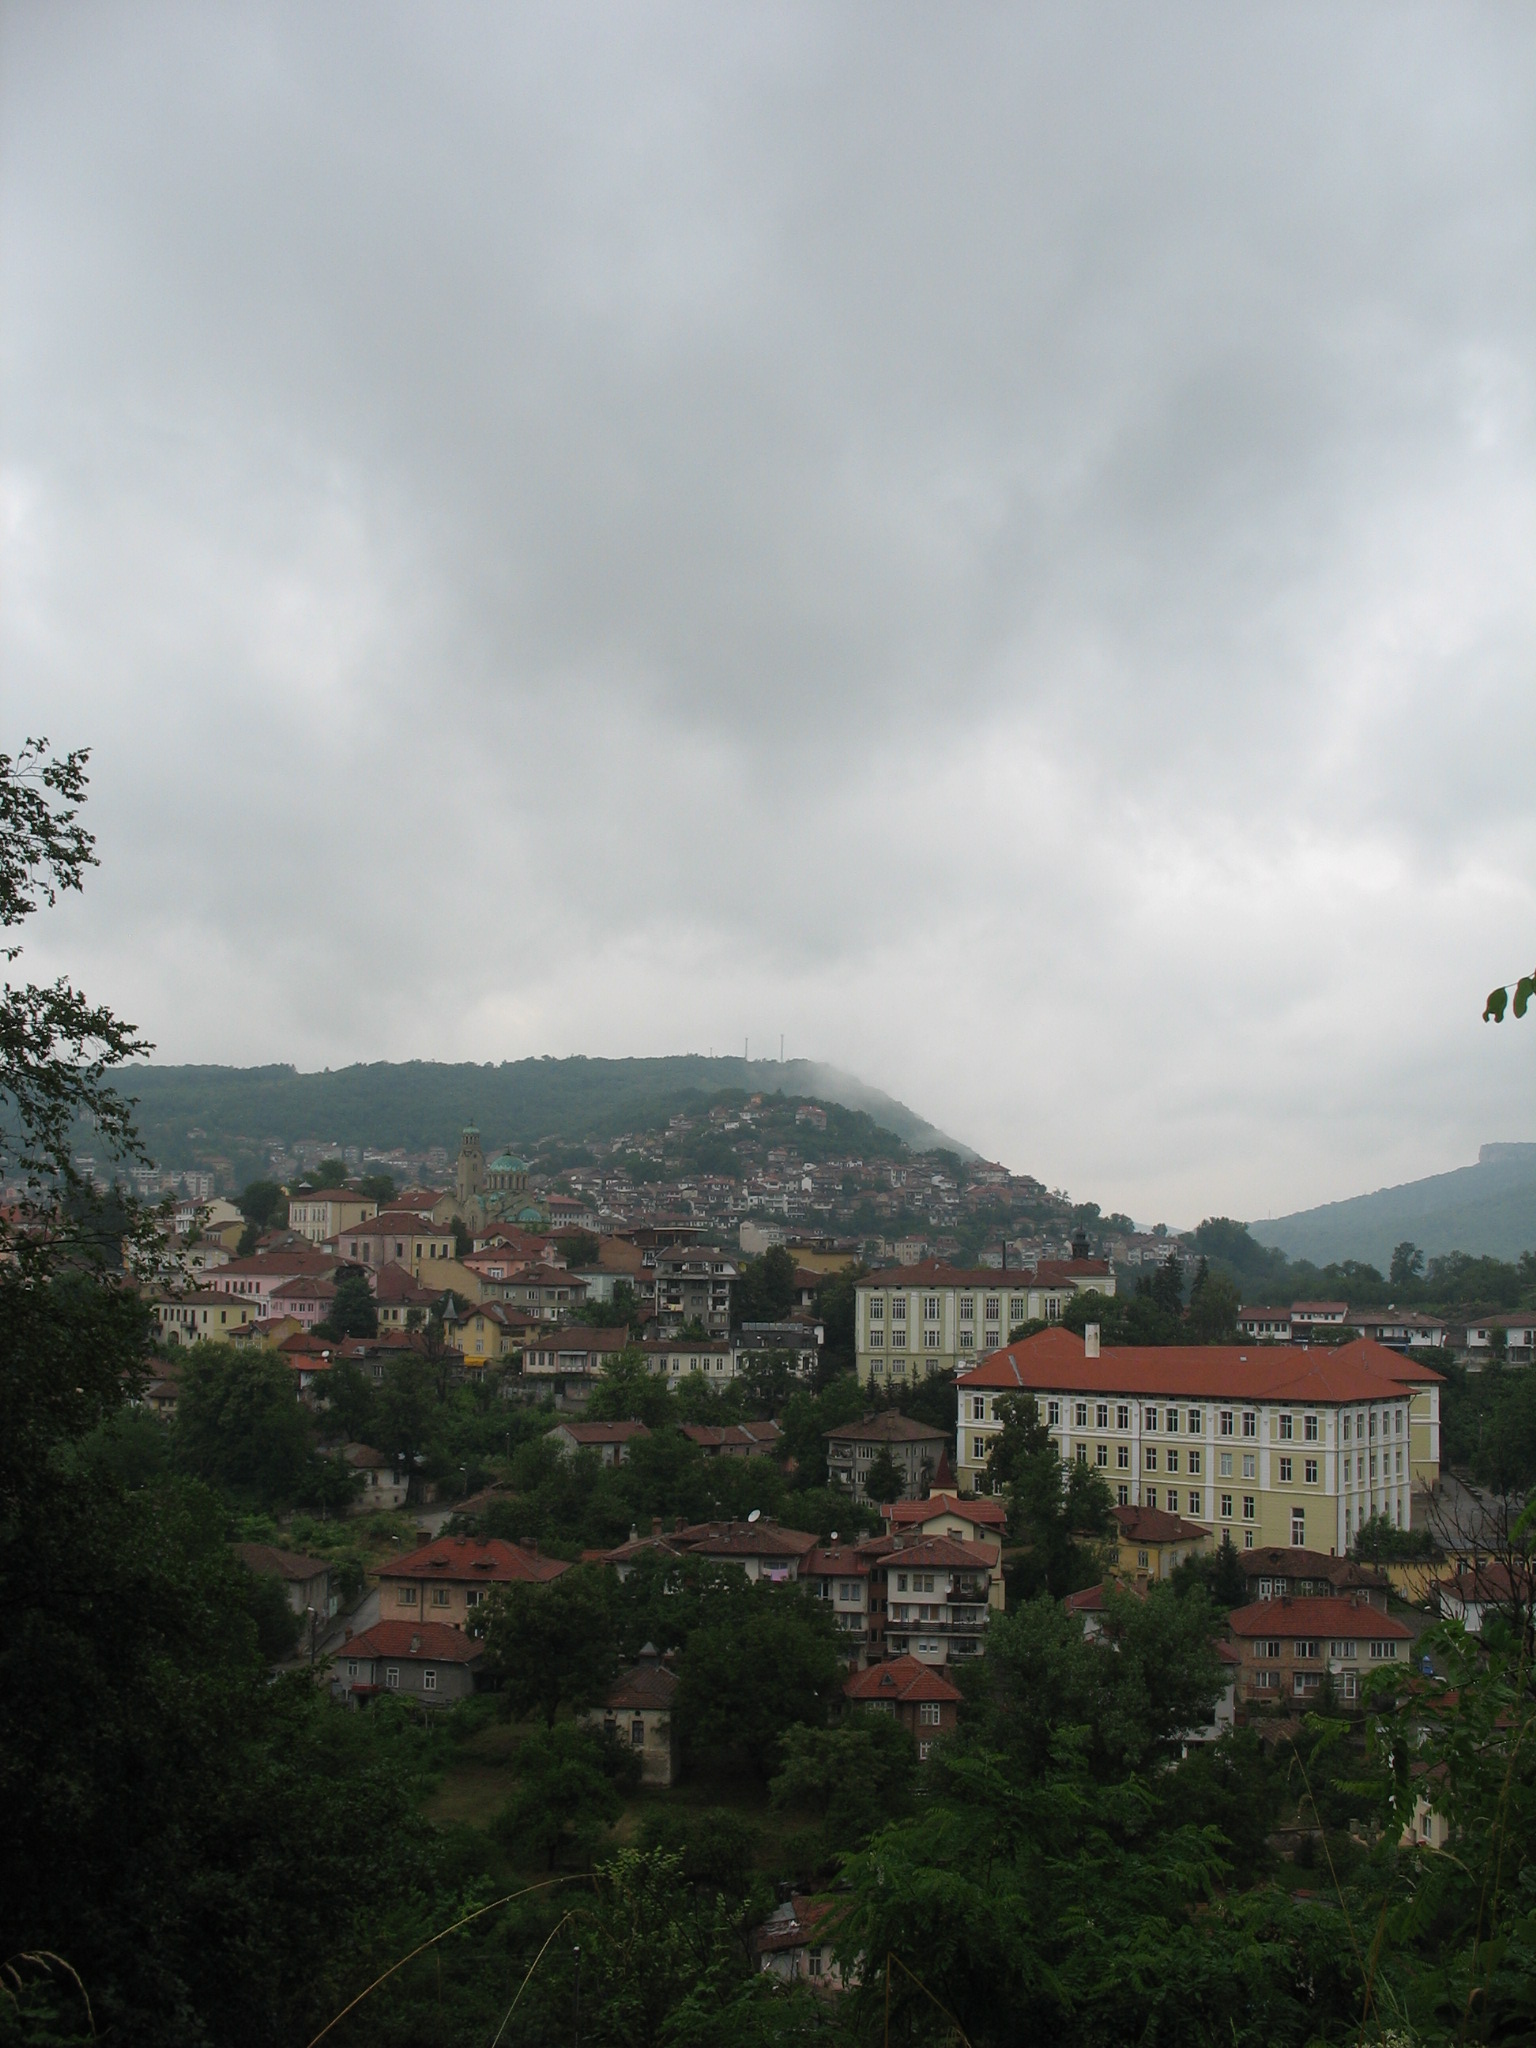 a small town nestled between lush green hills